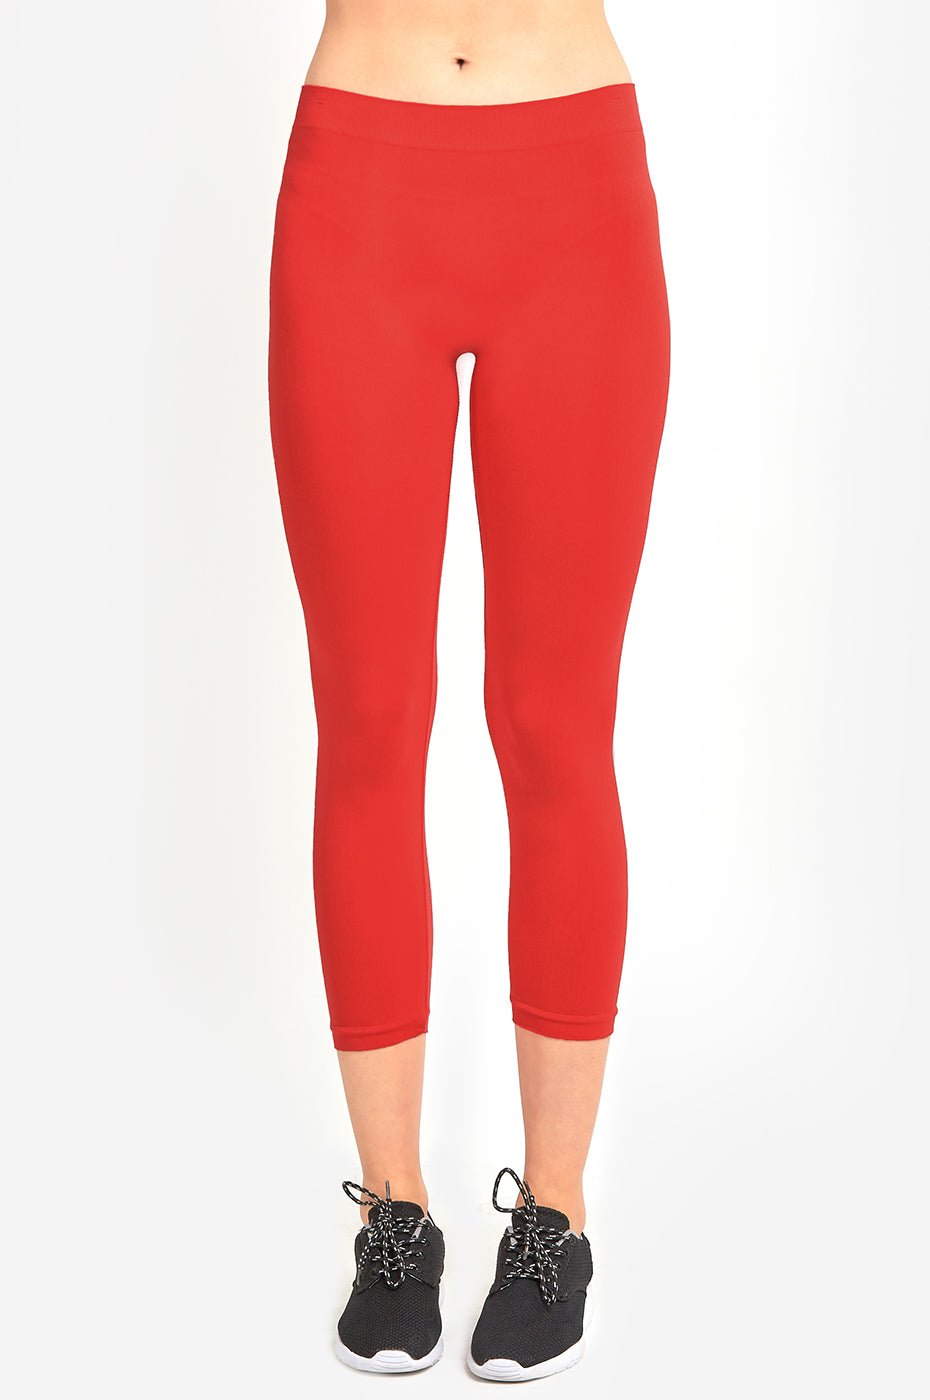 MOPAS Soft Stretch Nylon Blend Unlined Capri Length Leggings with Ribbed Elastic Waistband - Fiery Red (EX004_FRE)